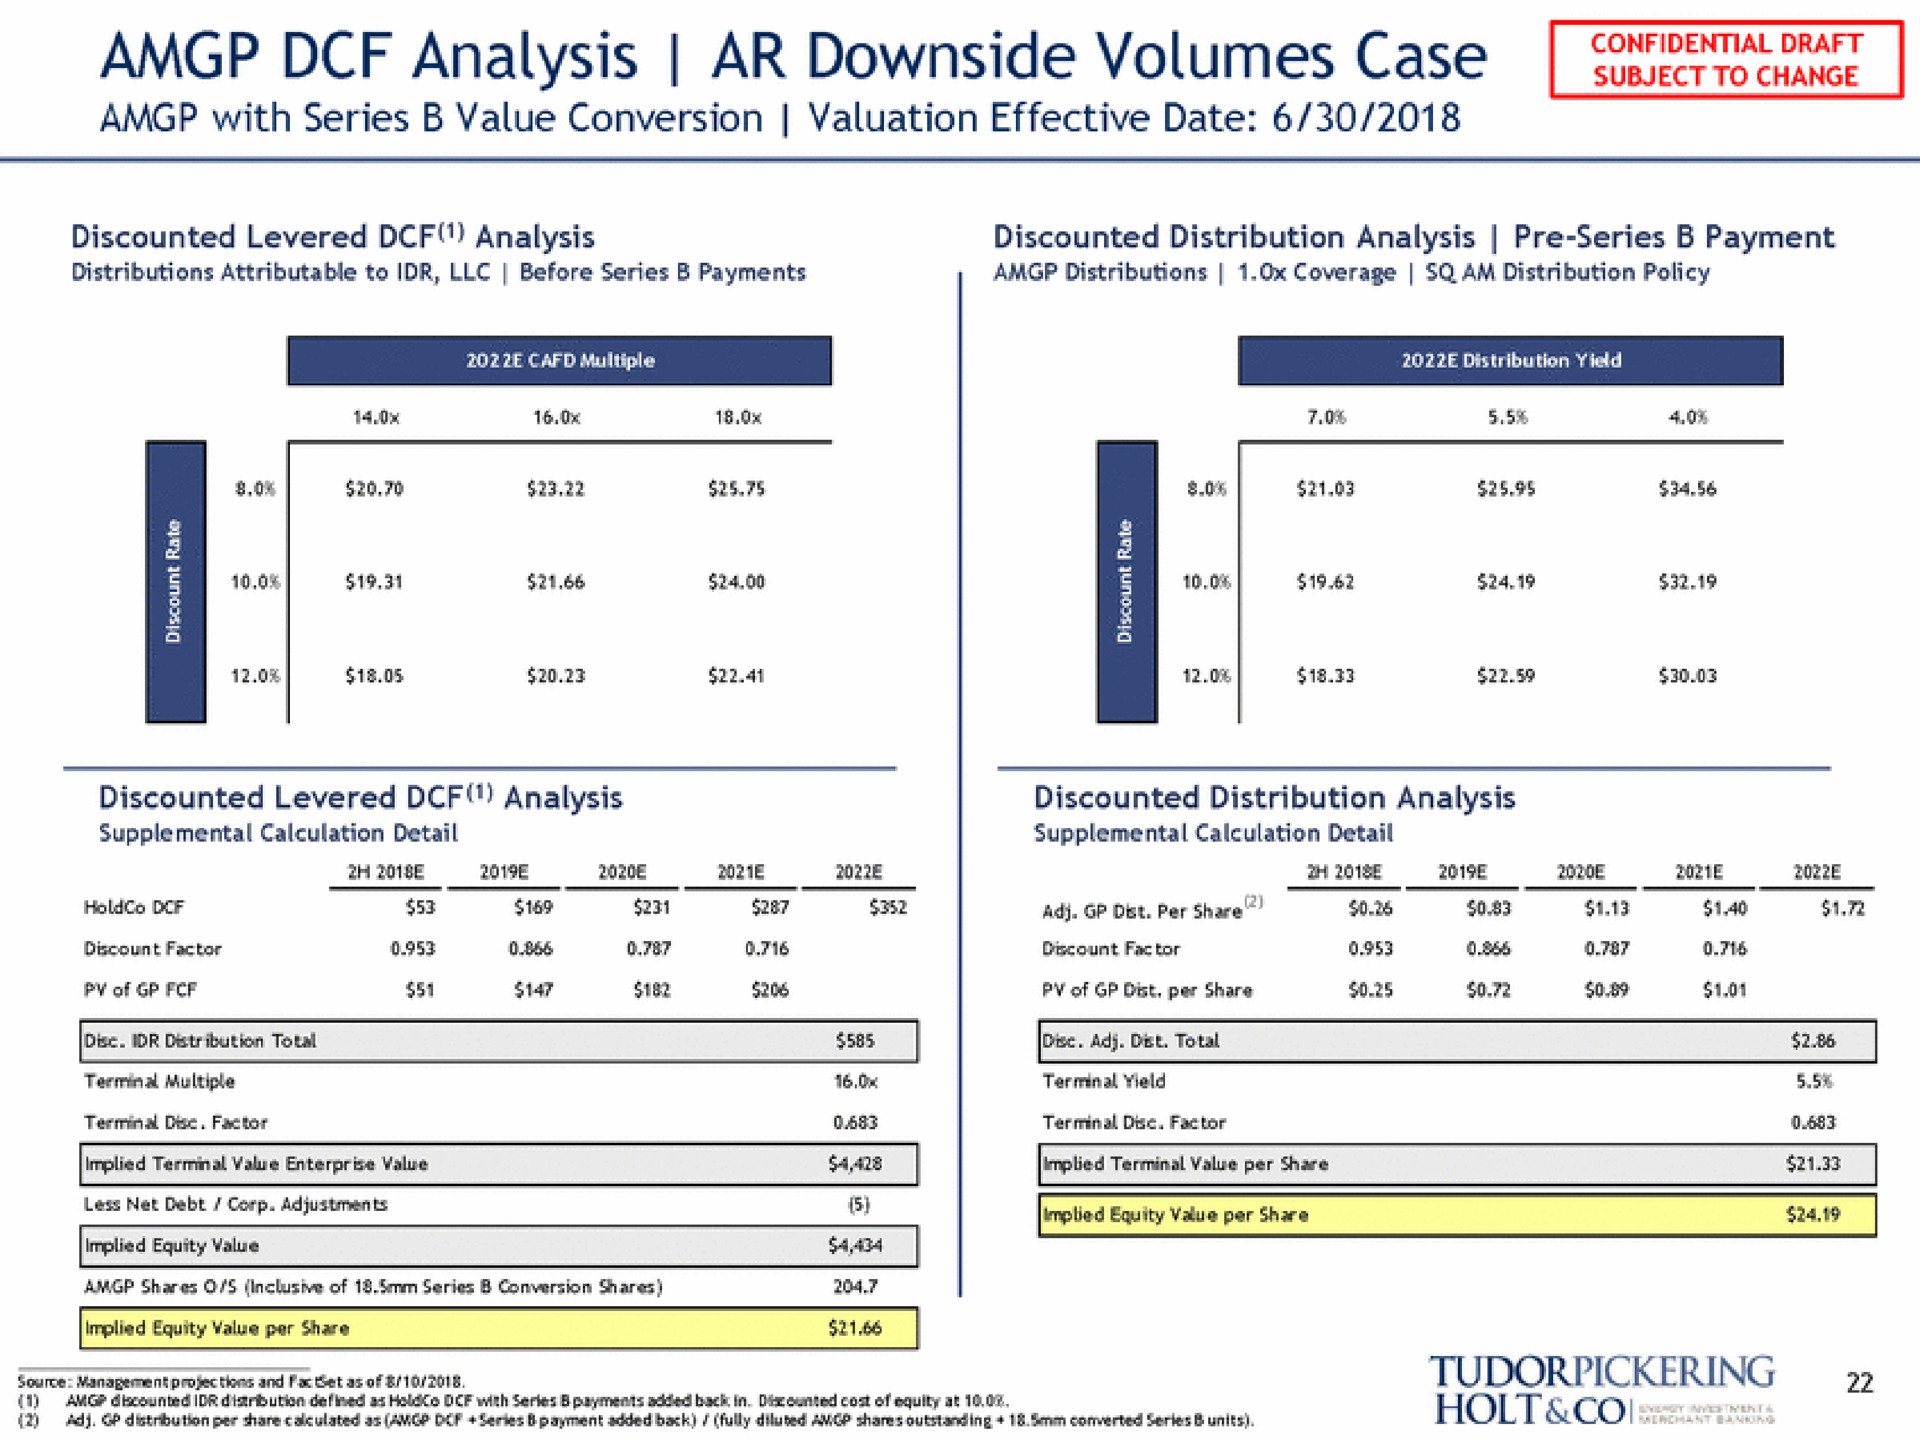 analysis downside volumes case a | Tudor, Pickering, Holt & Co